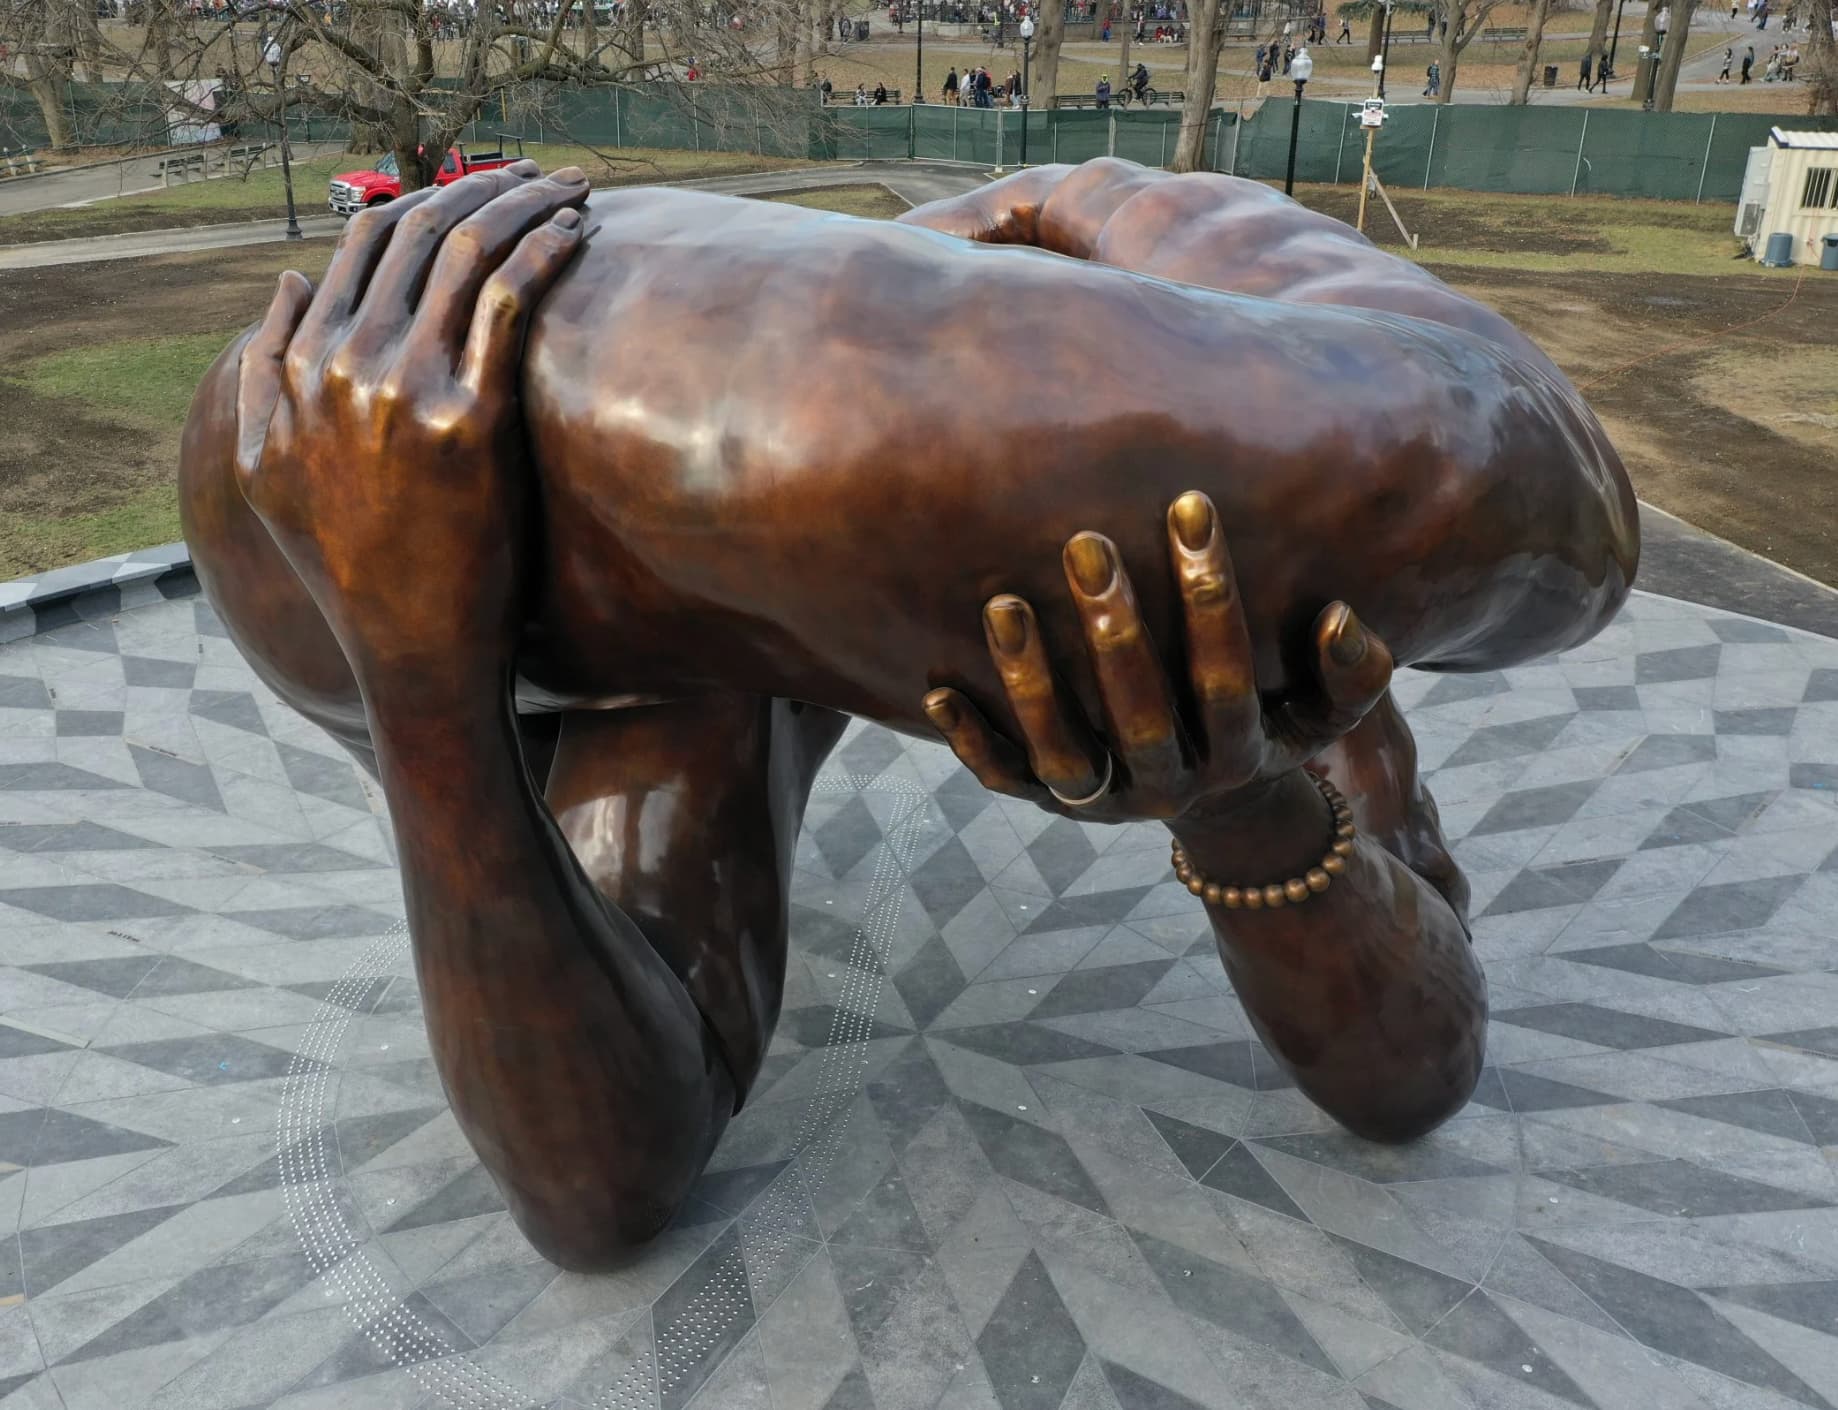 While intended to commemorate Martin Luther King Jr. and Coretta Scott King, this Boston statue sent a different message, one about eating the booty like groceries. 